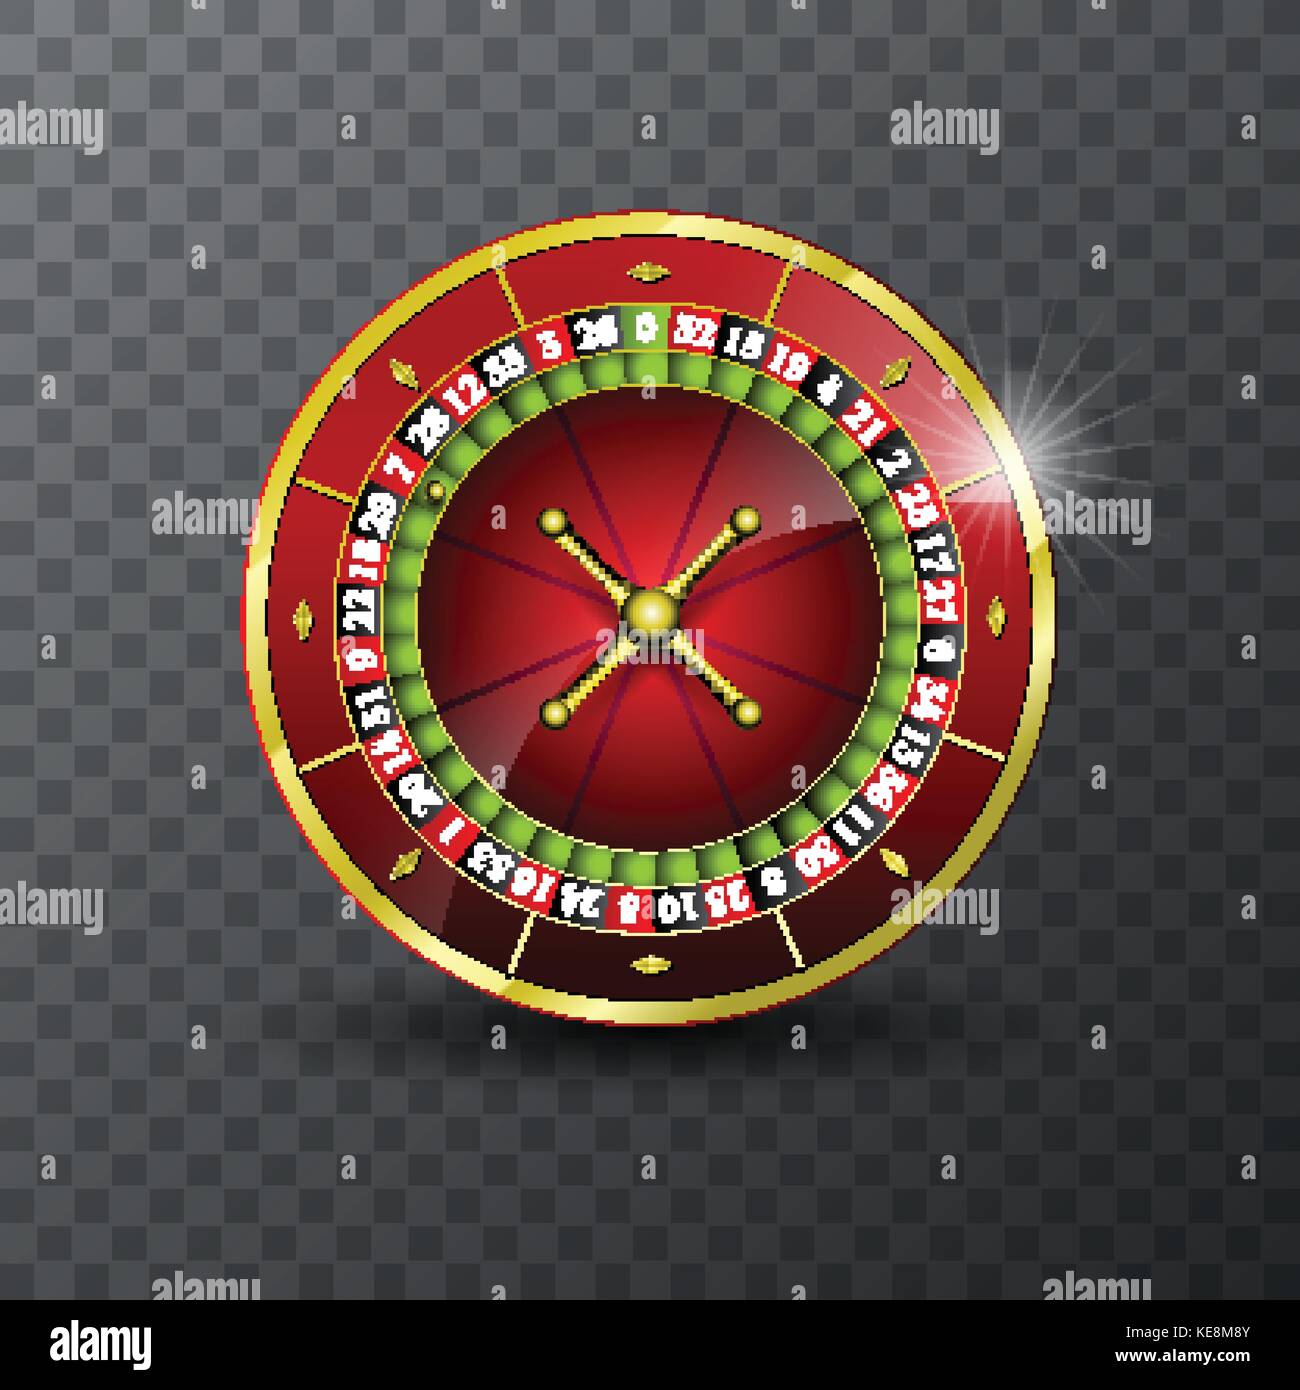 Vector illustration on a casino theme with roulette wheel on transpareent background. Stock Vector